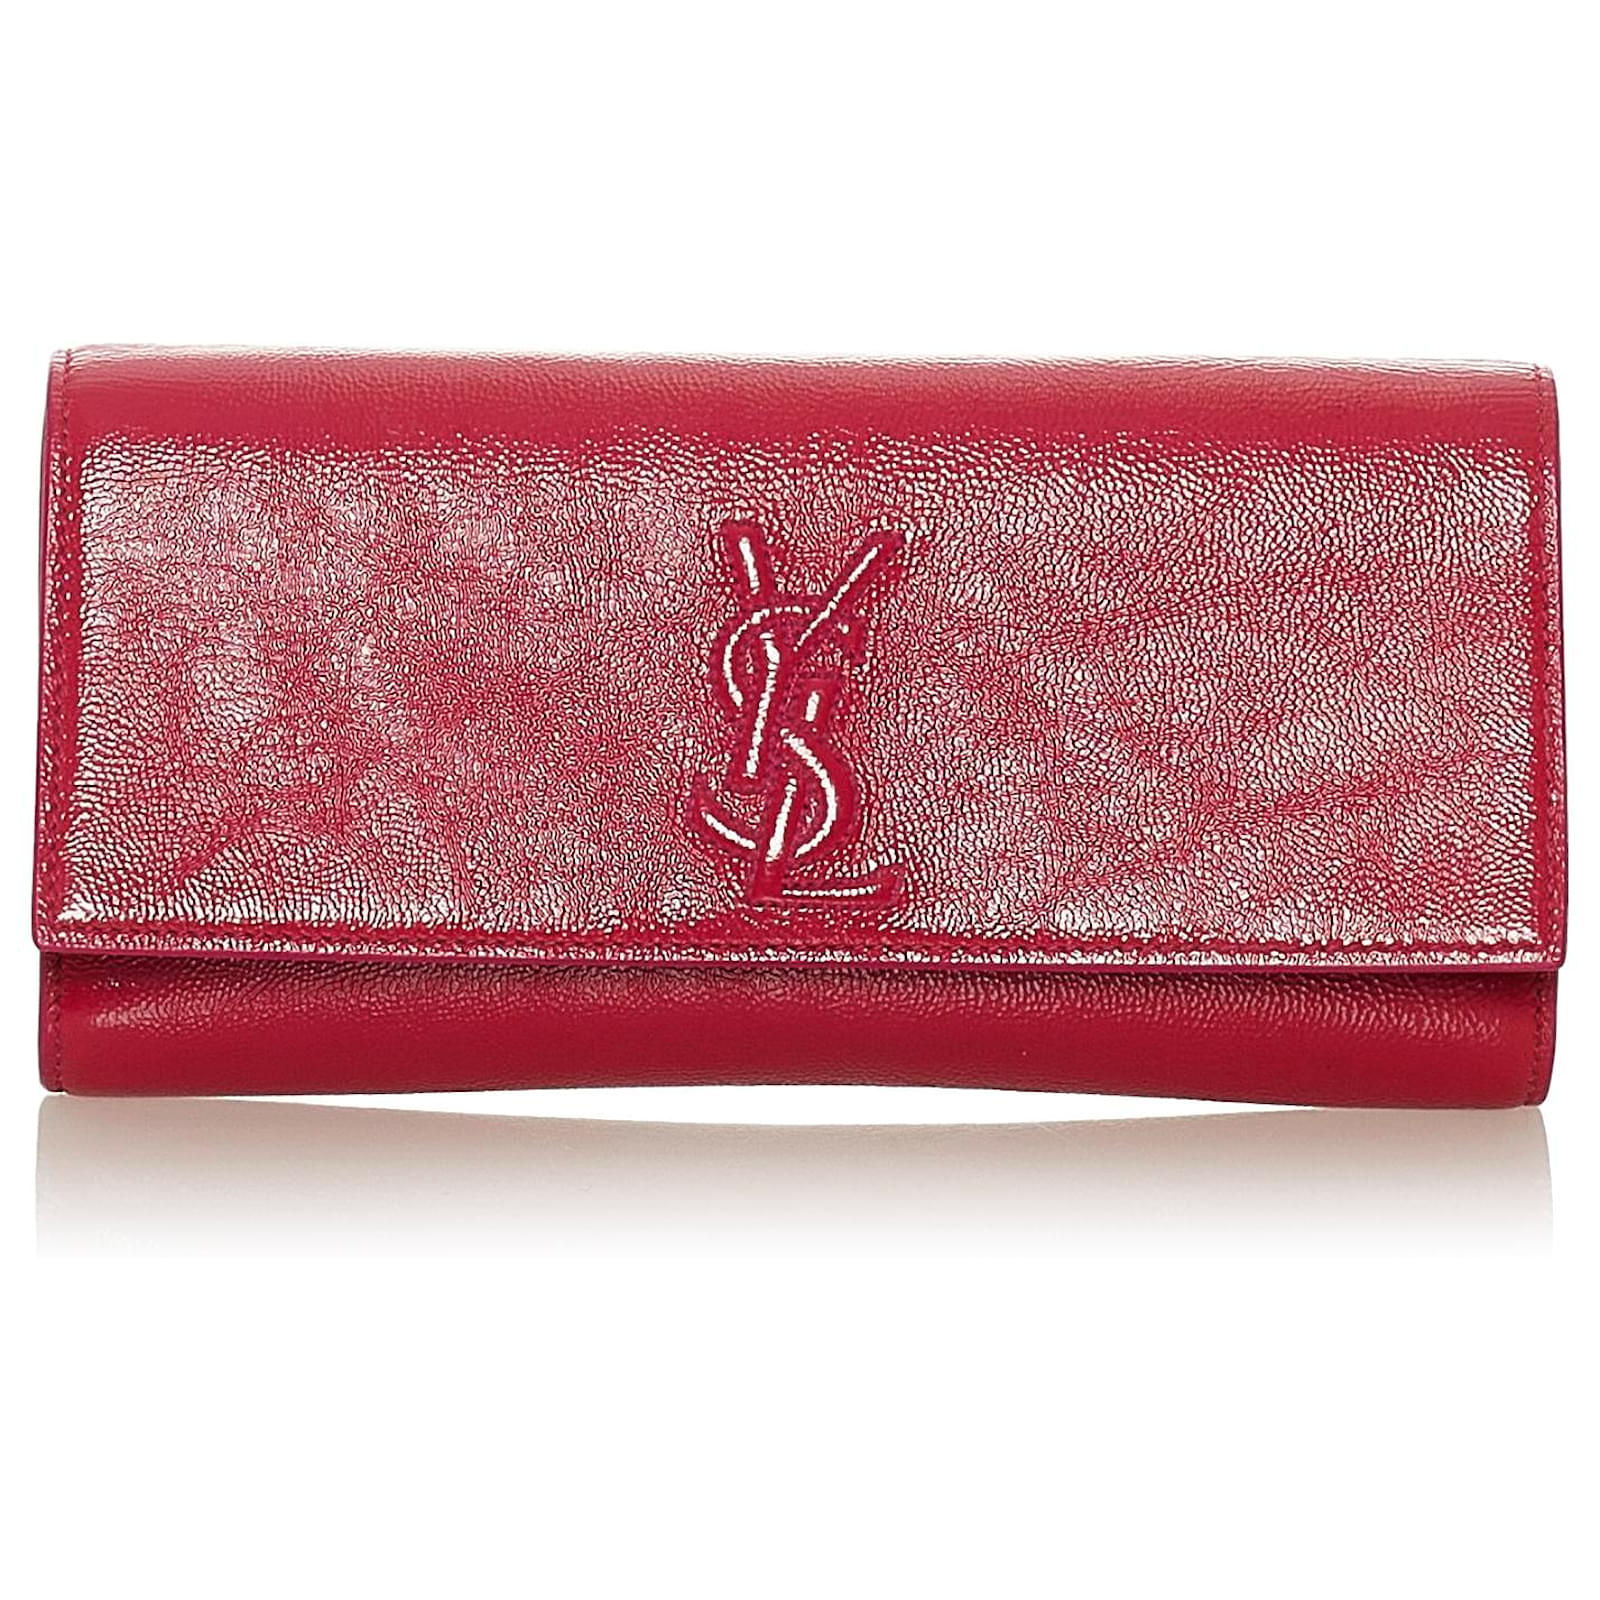 Patent leather clutch bag Yves Saint Laurent Pink in Patent